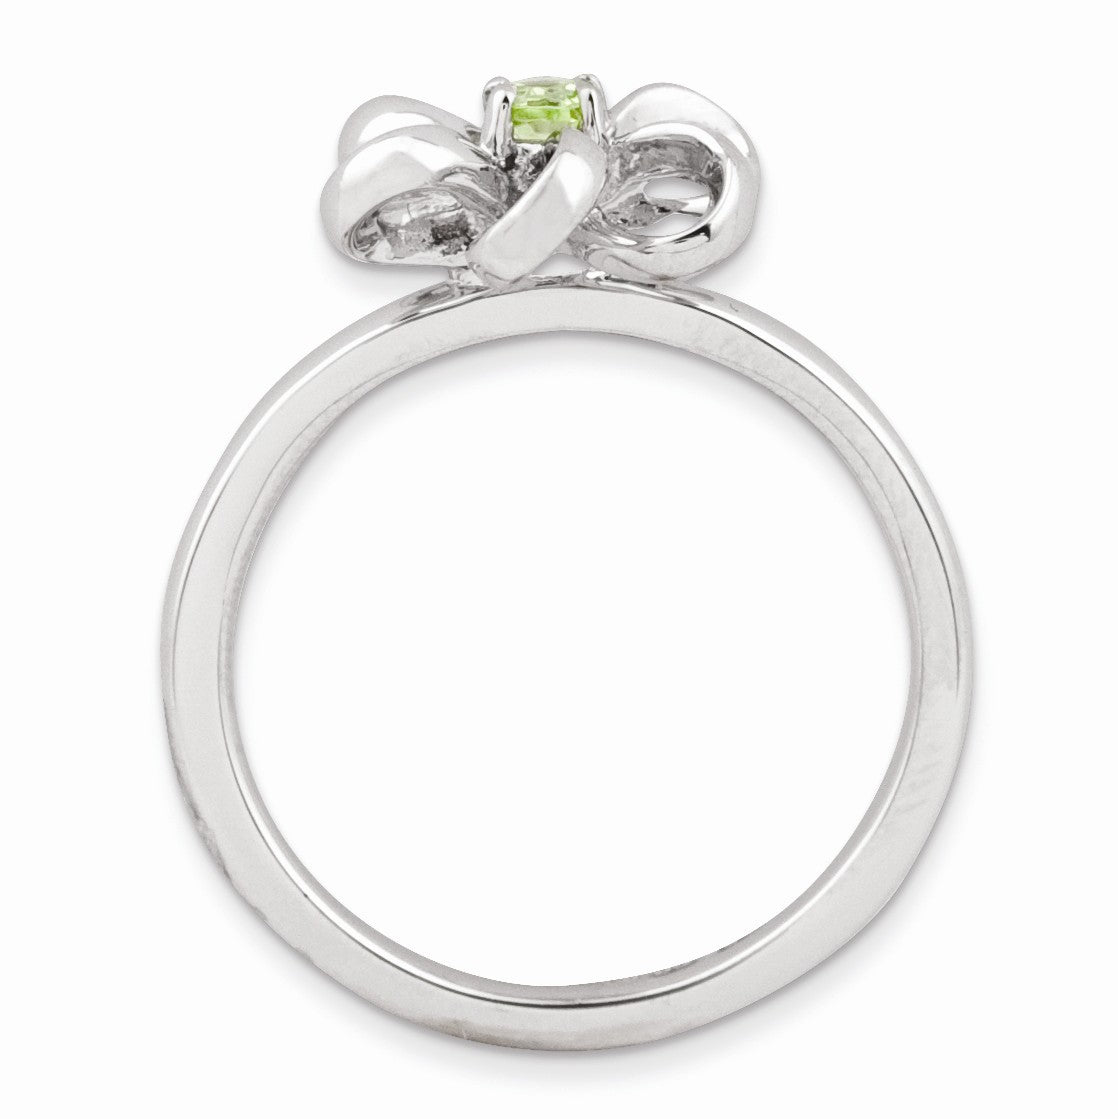 Alternate view of the Silver Stackable 12mm .12 Carat Peridot Flower Ring by The Black Bow Jewelry Co.